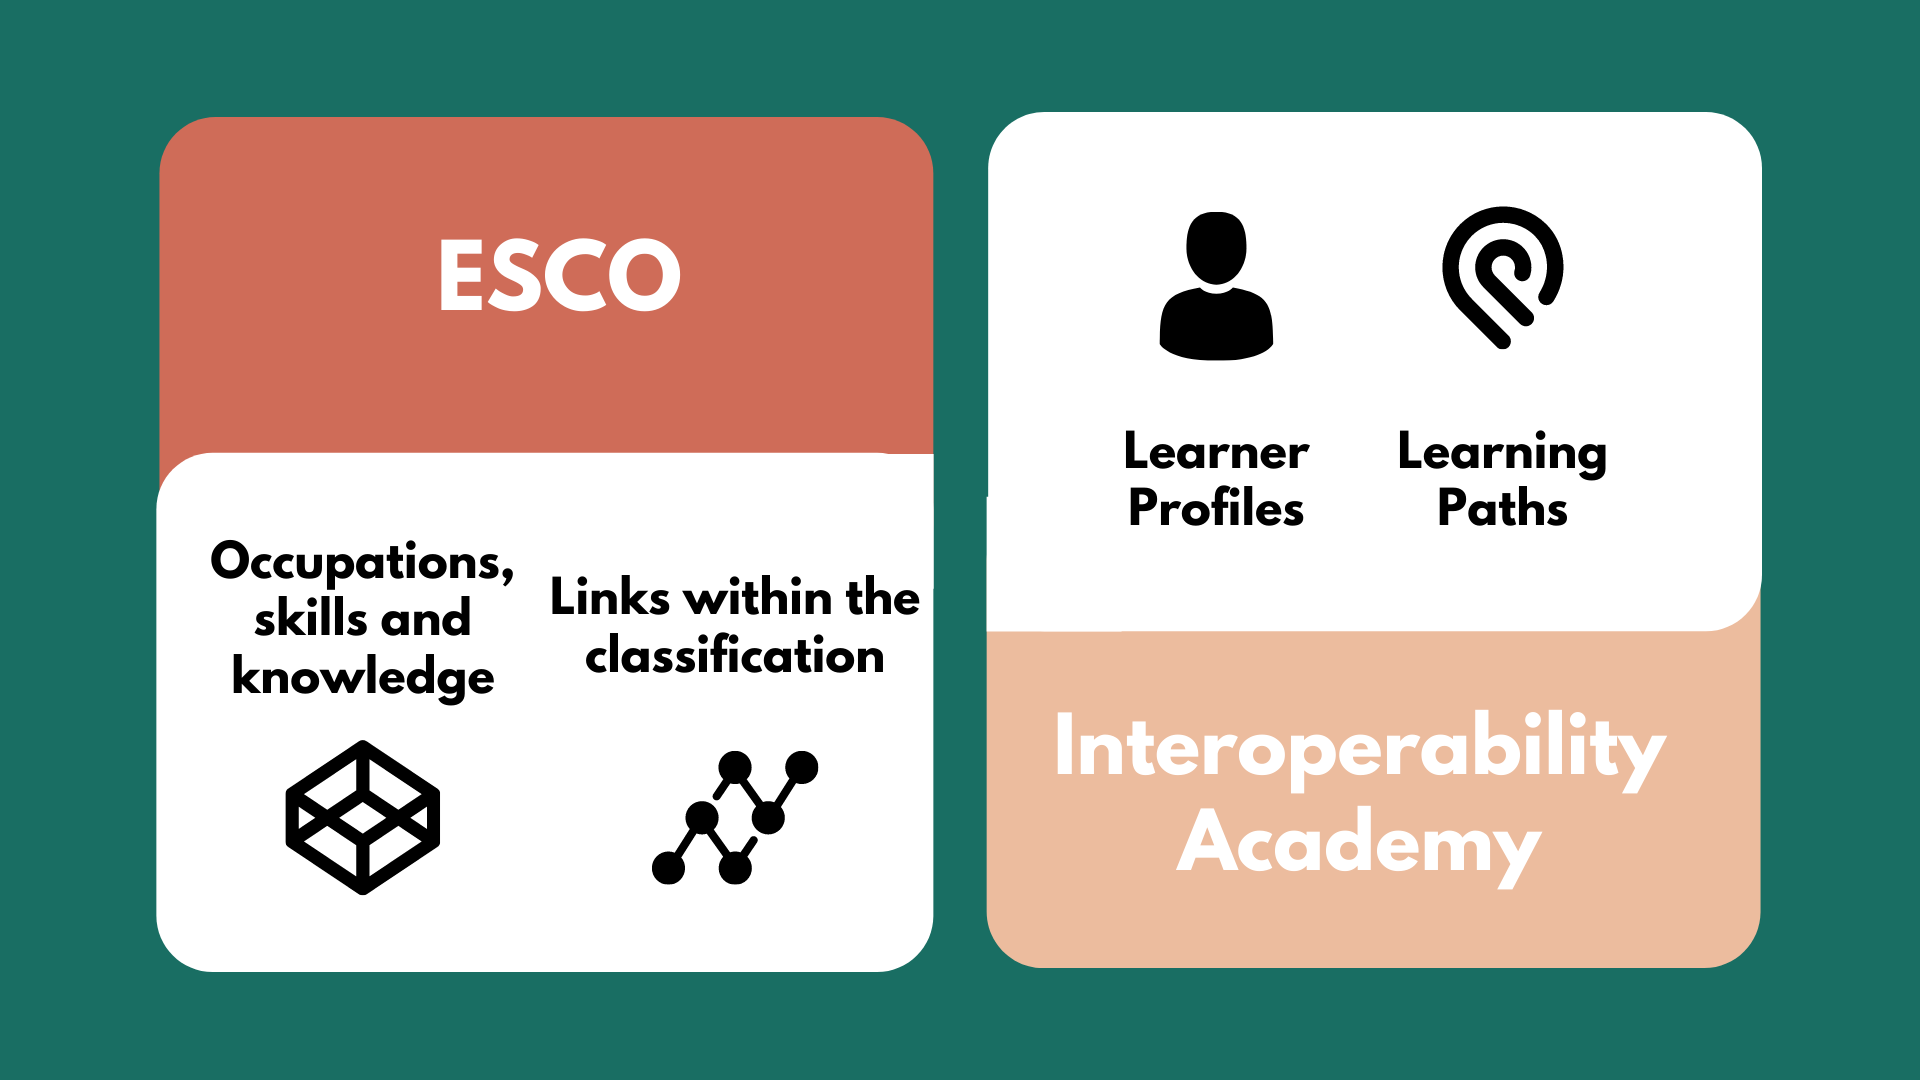 Image showing how ESCO supports interoperability learning courses for civil servants through the Commission’s Interoperability Academy